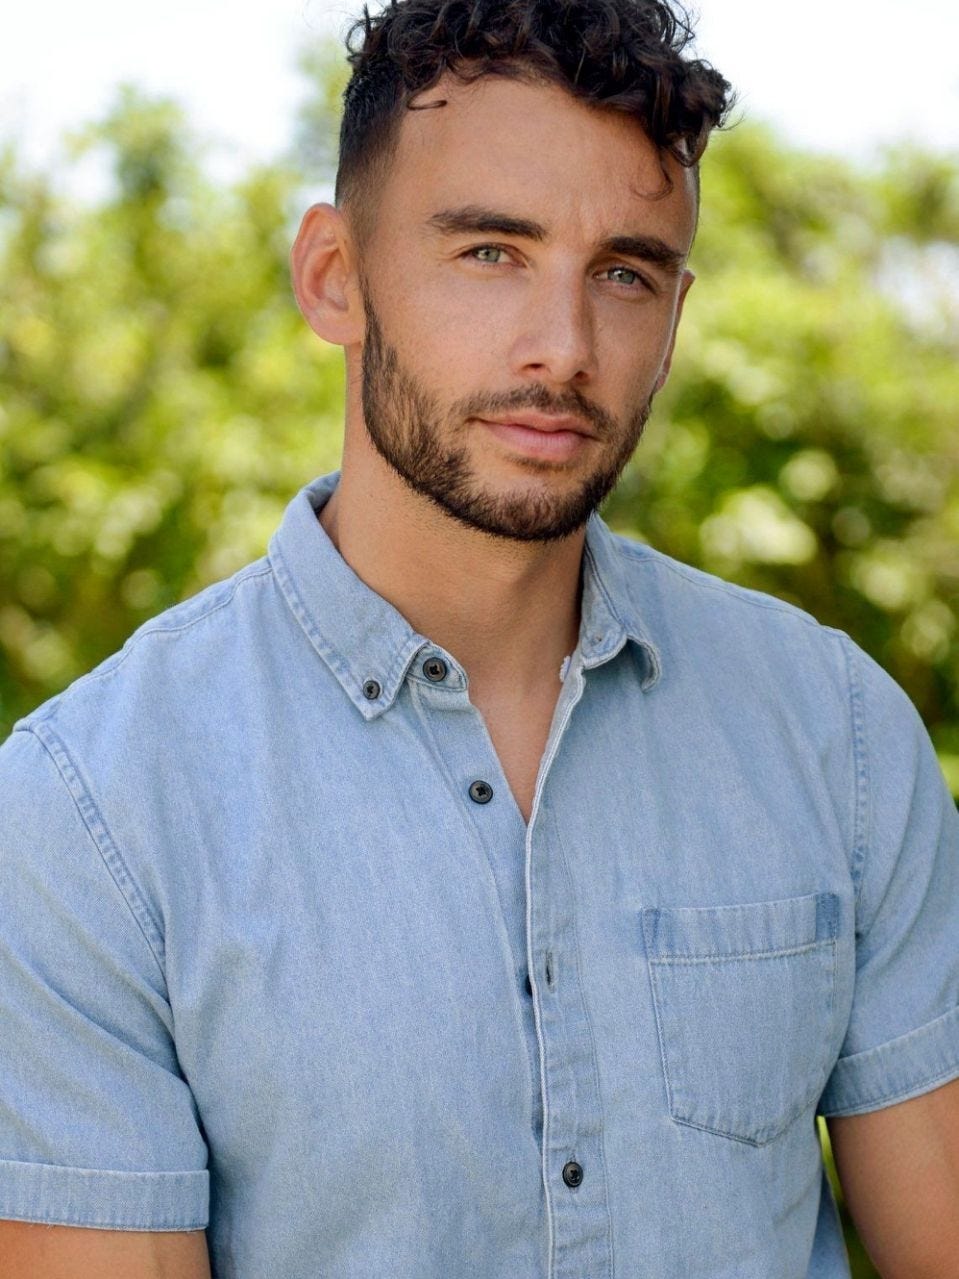 This is Why 'Bachelor in Paradise' Star Brendan Morais Reportedly Fired From NordicTrack